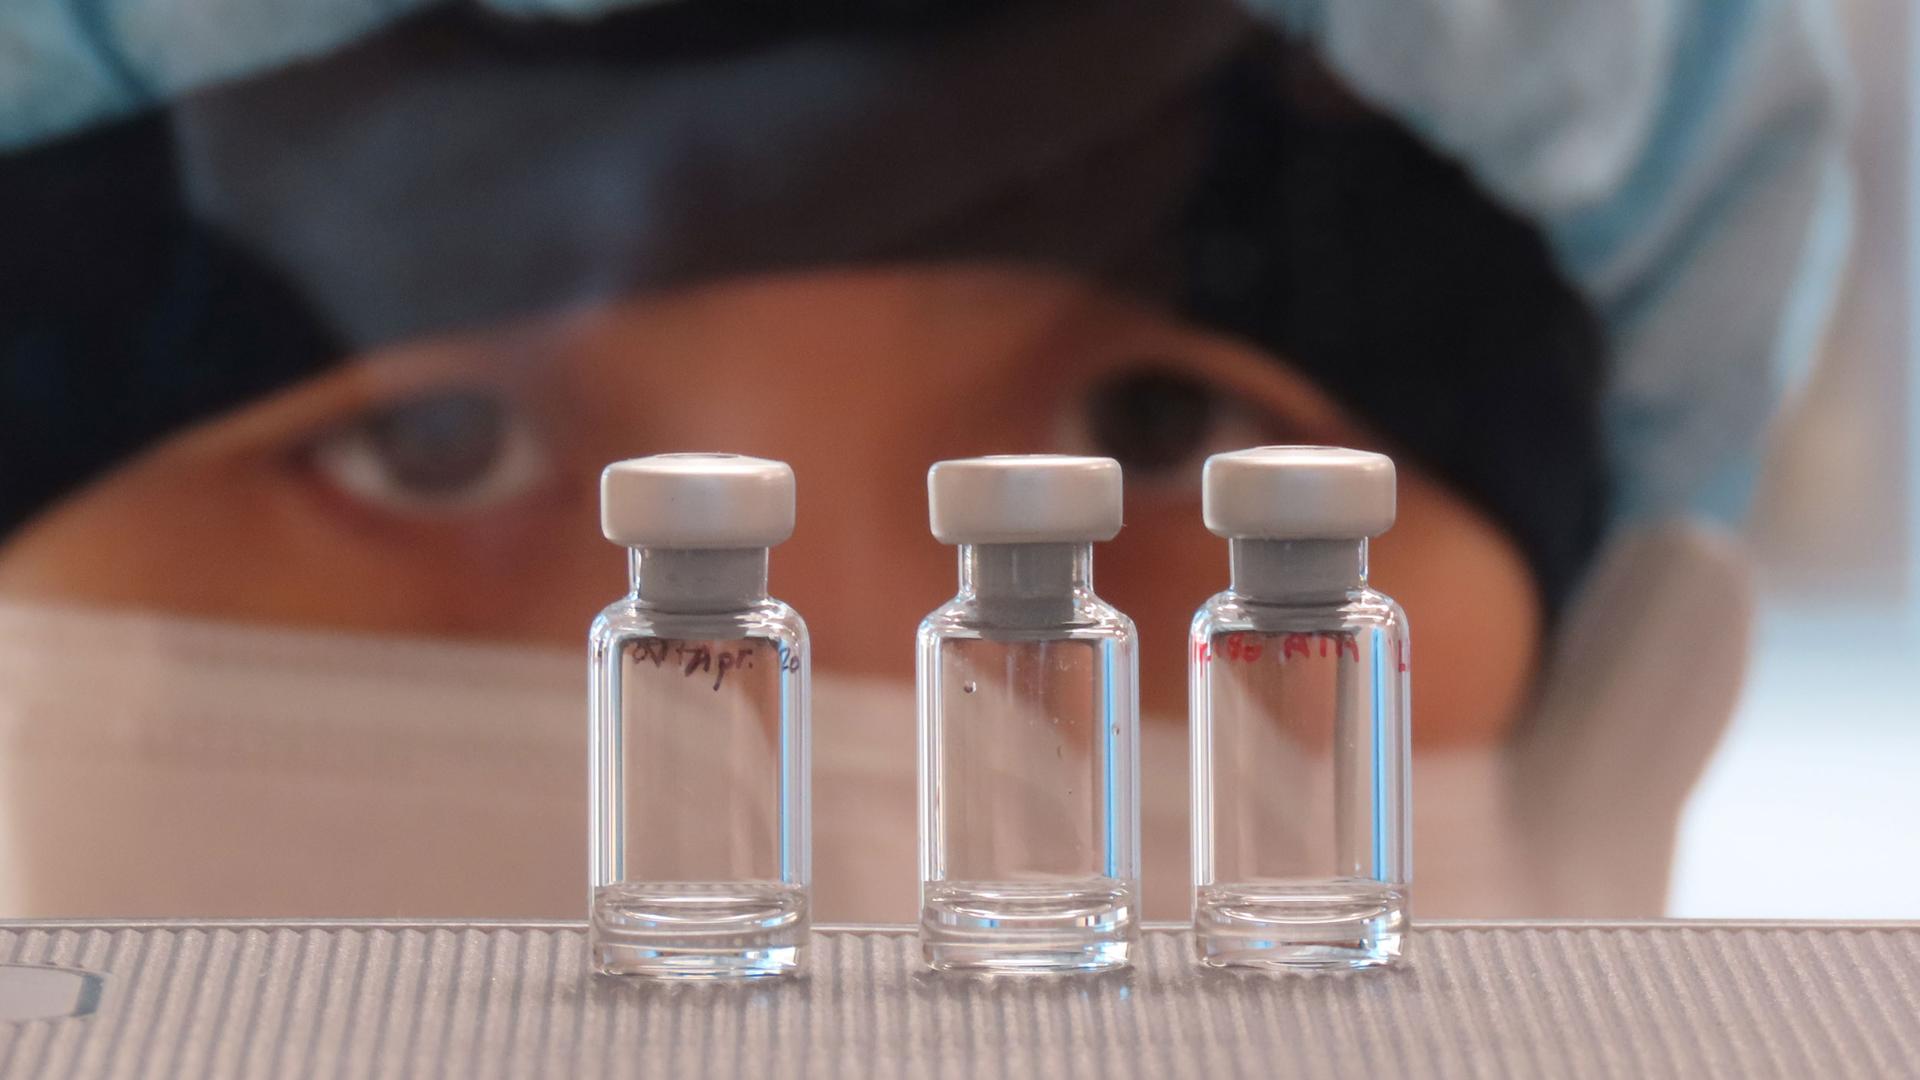 Three small, clear glass vials are shown with the eyes of a scientist looking at them in the background.